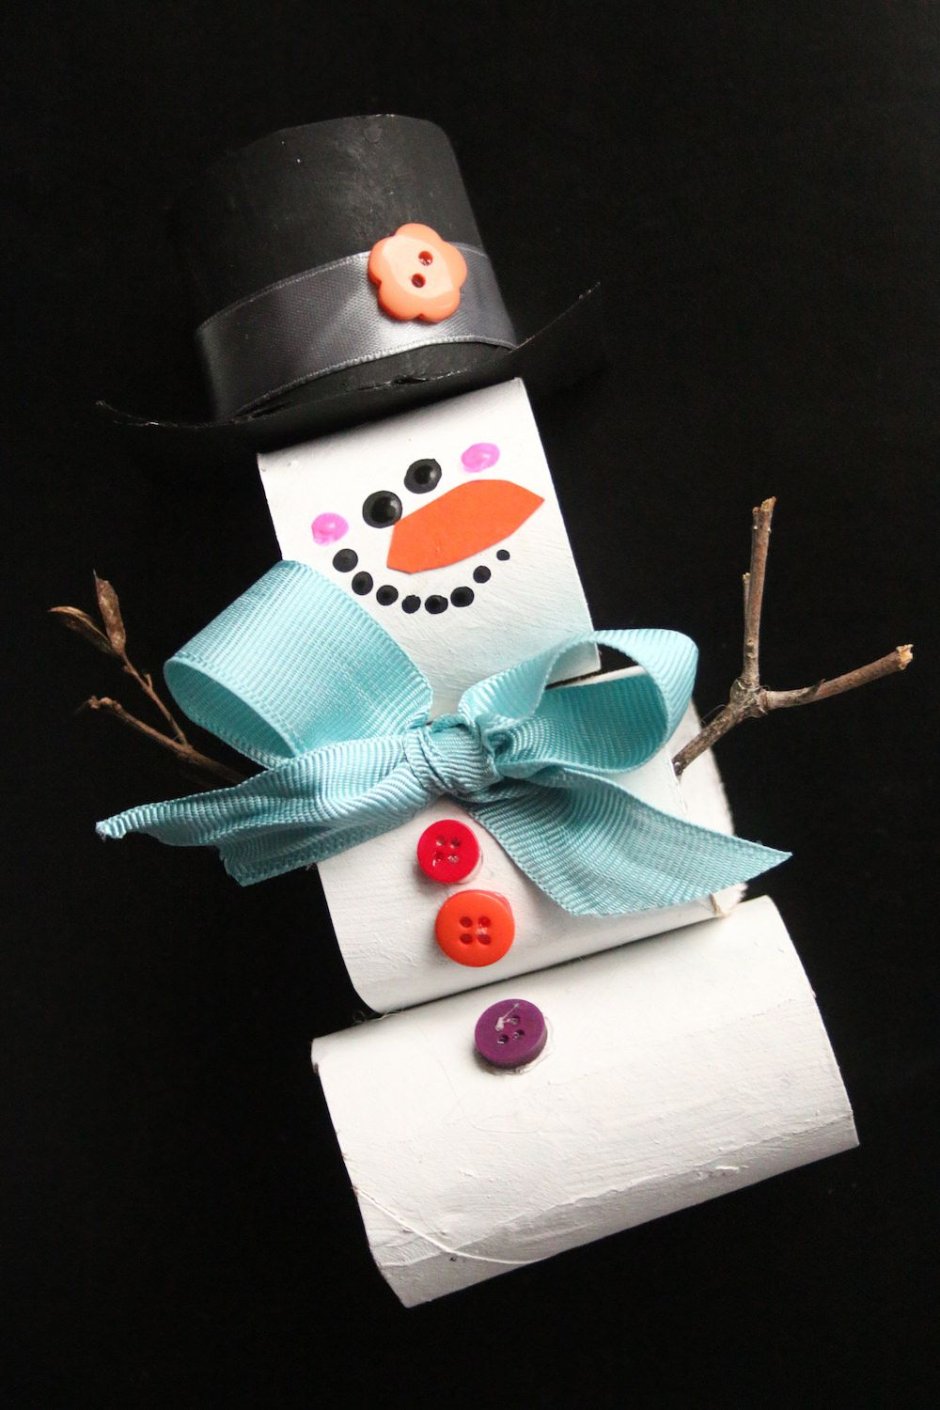 Make a Snowman with Toilet paper